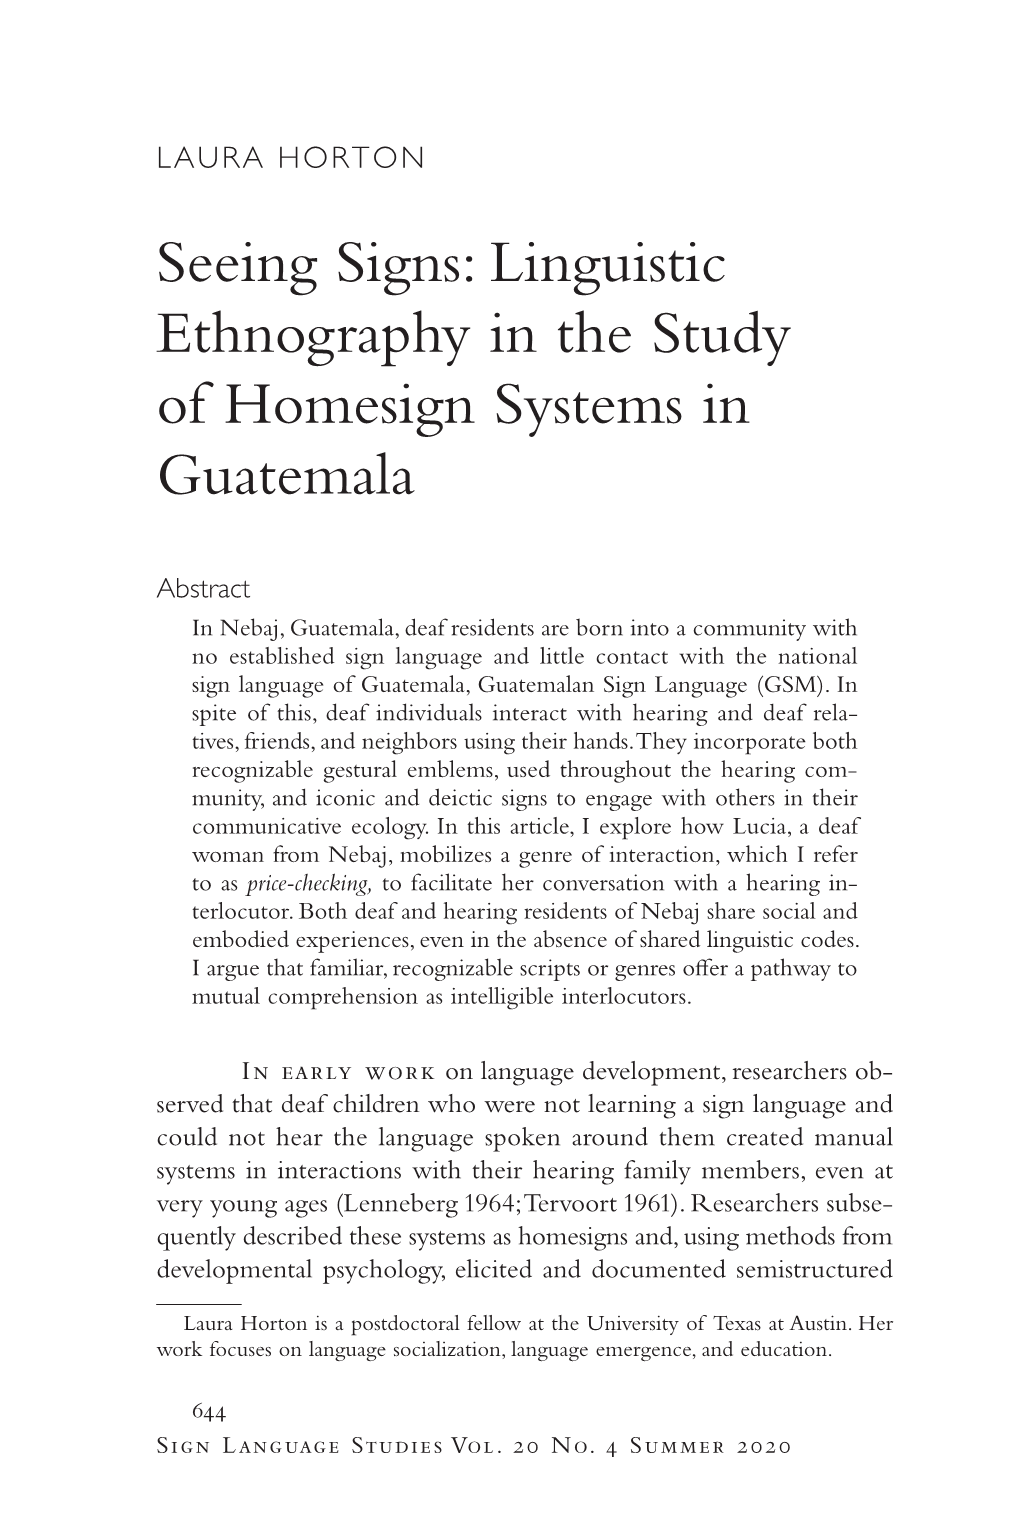 Seeing Signs: Linguistic Ethnography in the Study of Homesign Systems in Guatemala